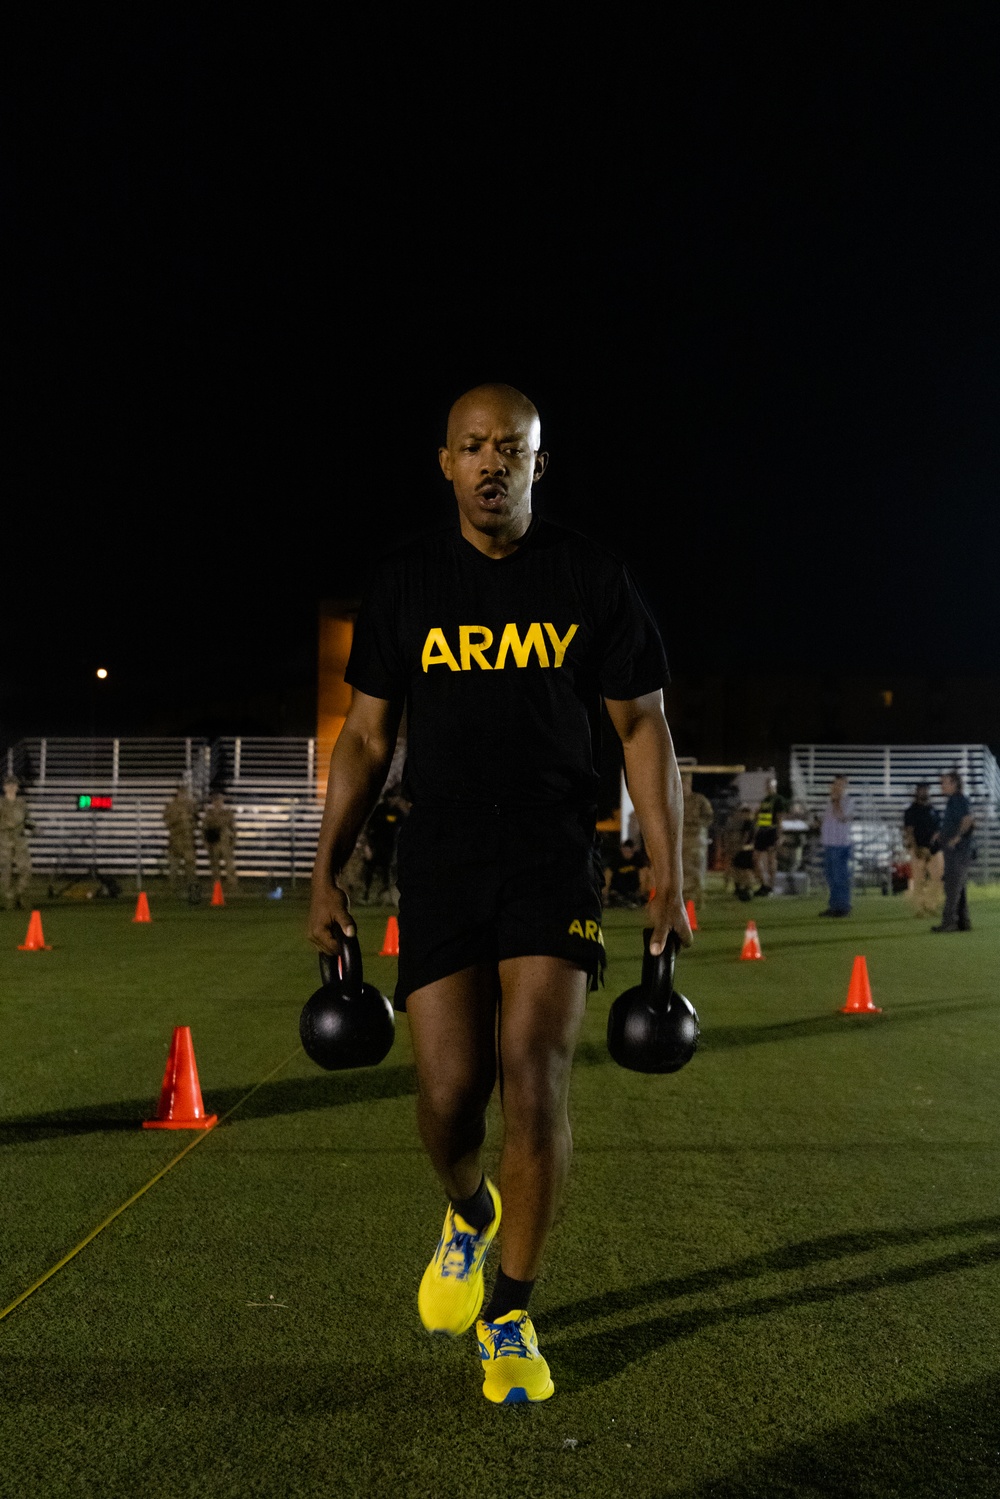 Army Futures Command Best Warrior Competition ACFT 2021